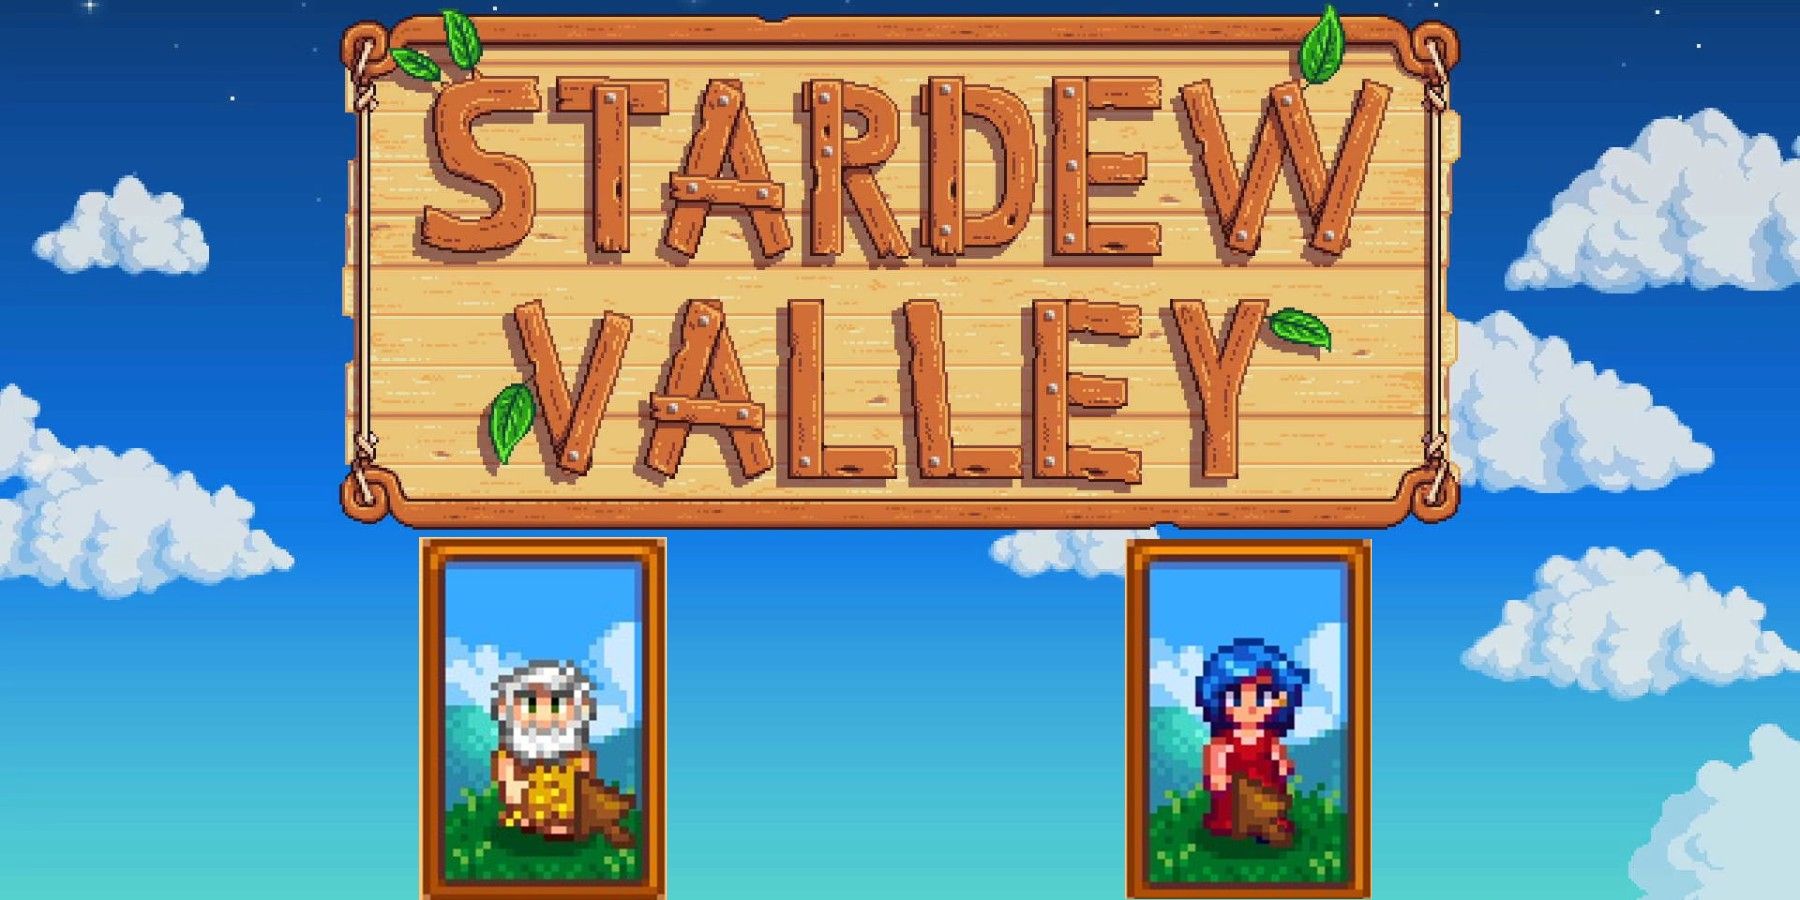 stardew valley logo and portaits